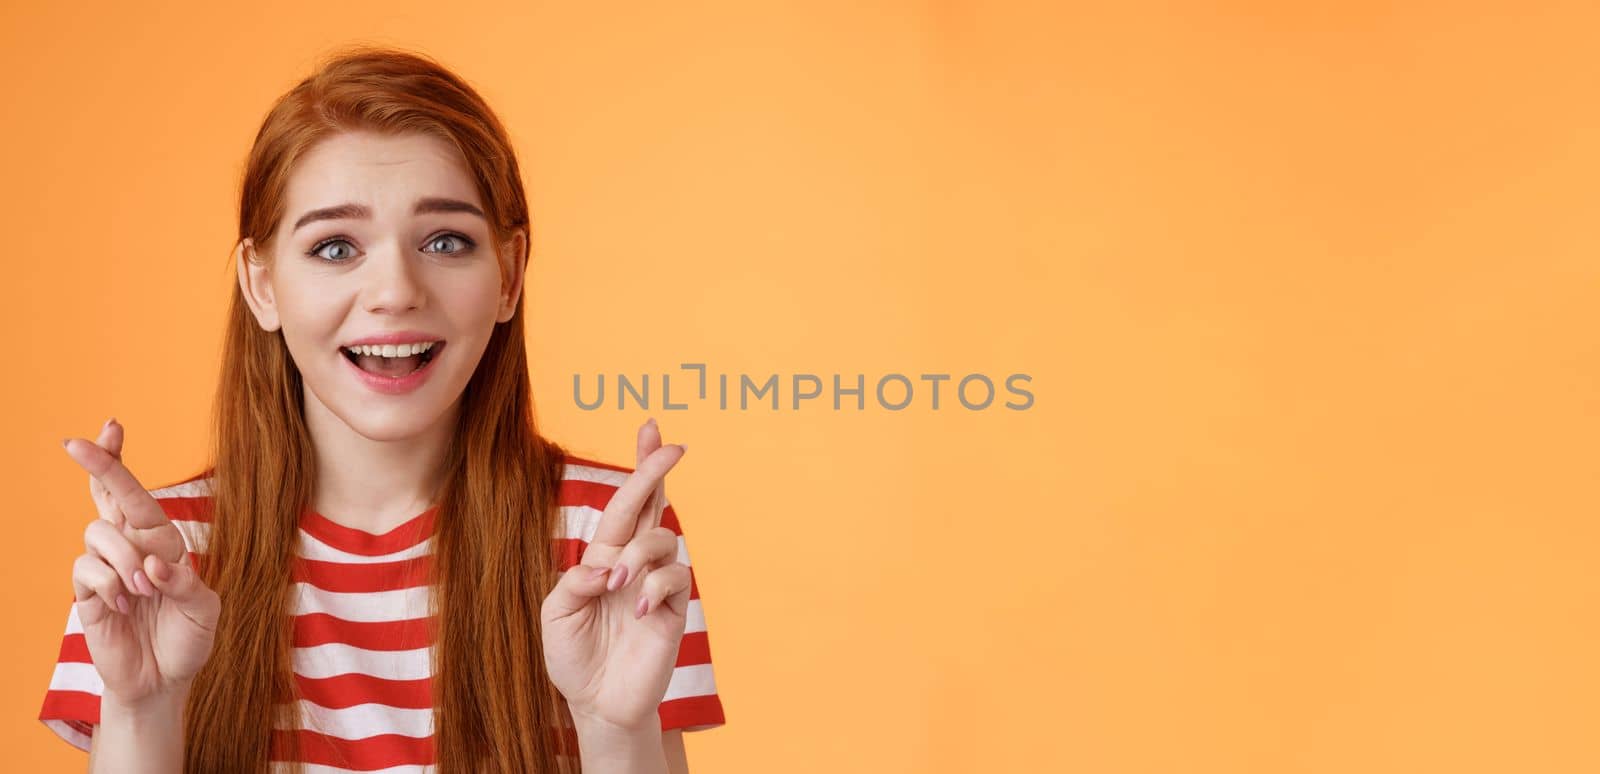 Excited hopeful redhead girl hope win lottery, smiling optimistic, look faith, believe dream come true, cross fingers good luck, make wish, anticipate good news, praying fortune, orange background.